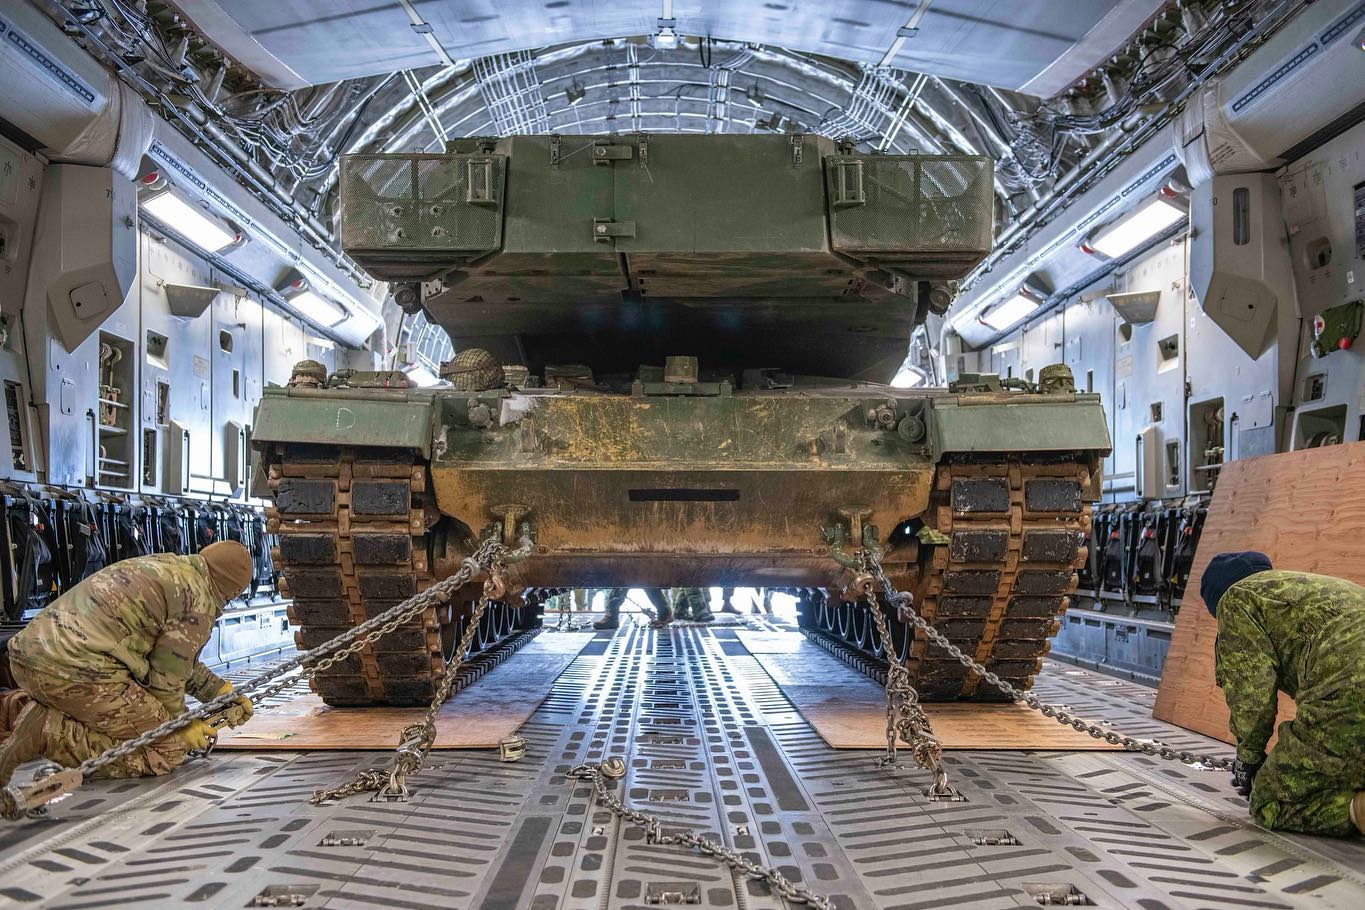 Poland and 4 other countries equipped the Leopard 2 tank battalion for Ukraine